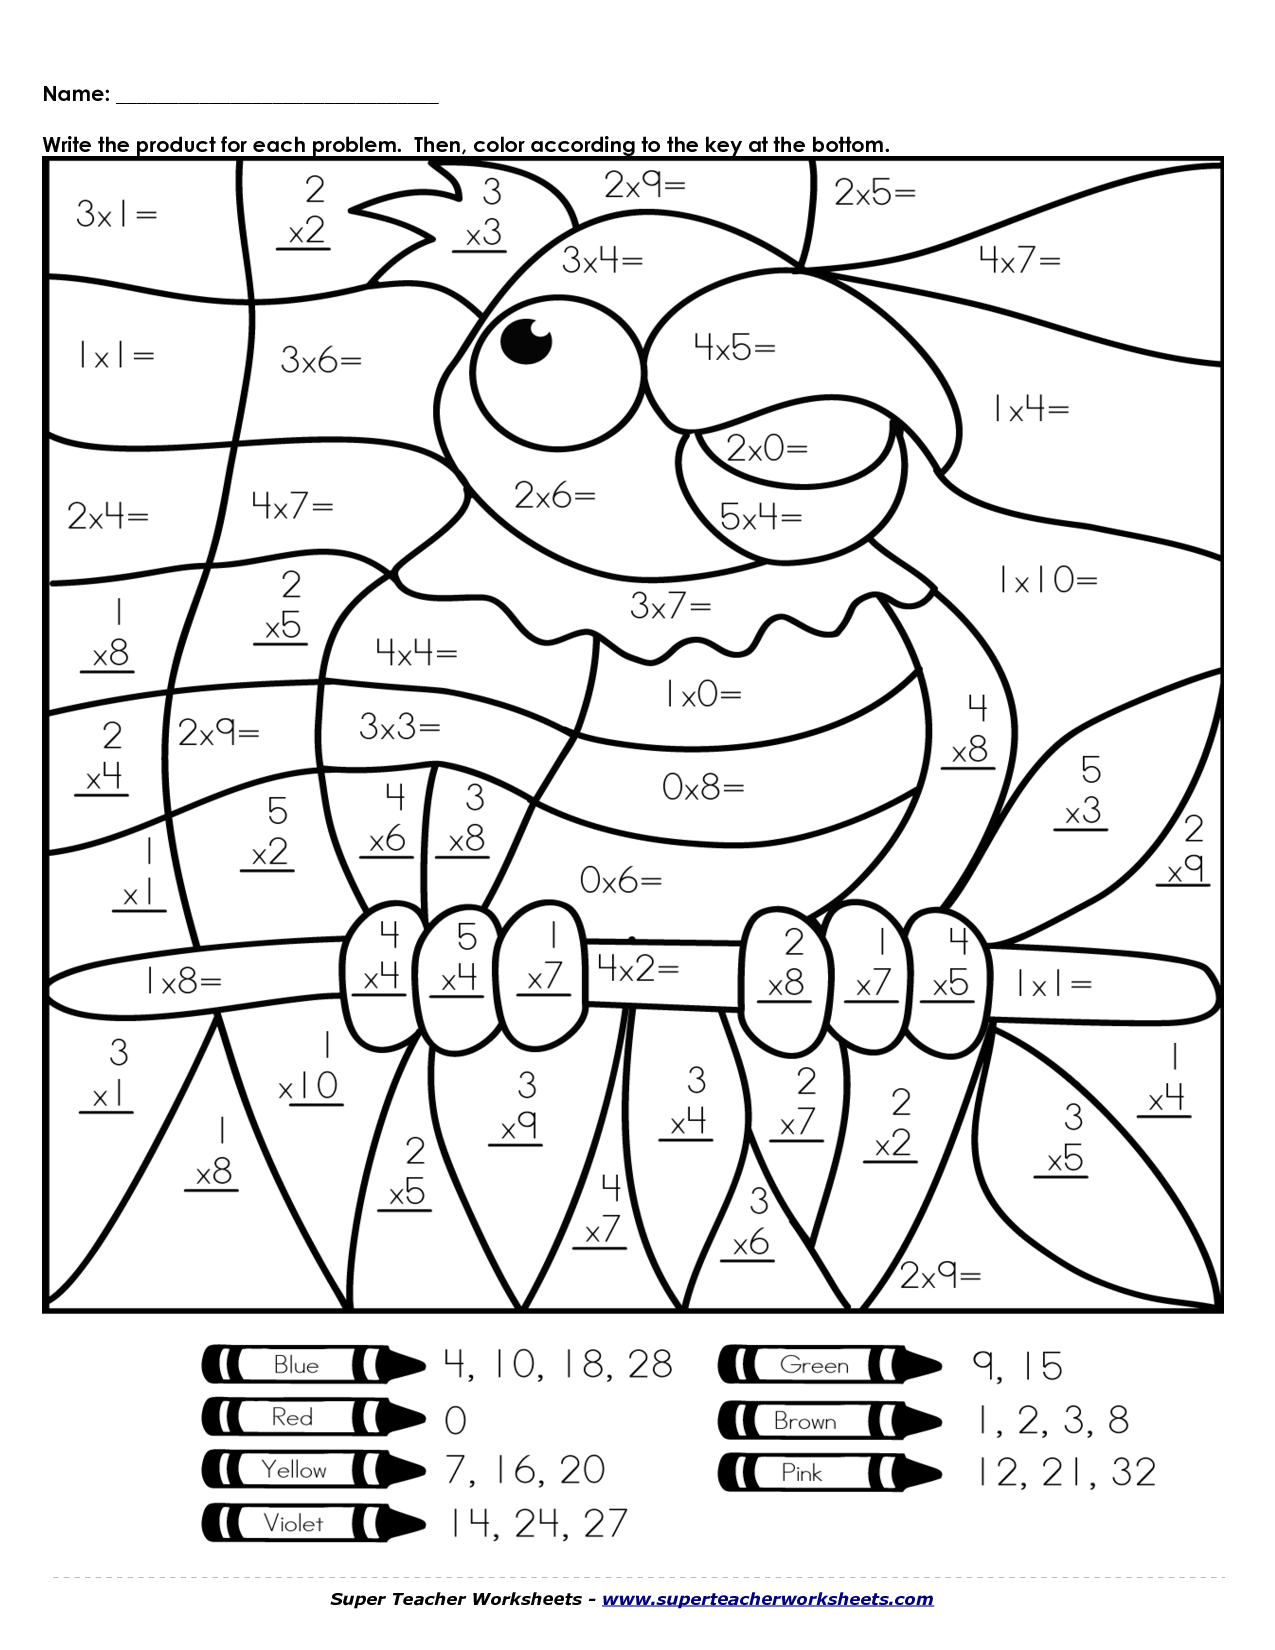 Horse Math Color By Number Coloring Pages Page 20   Line.207QQ.com ...